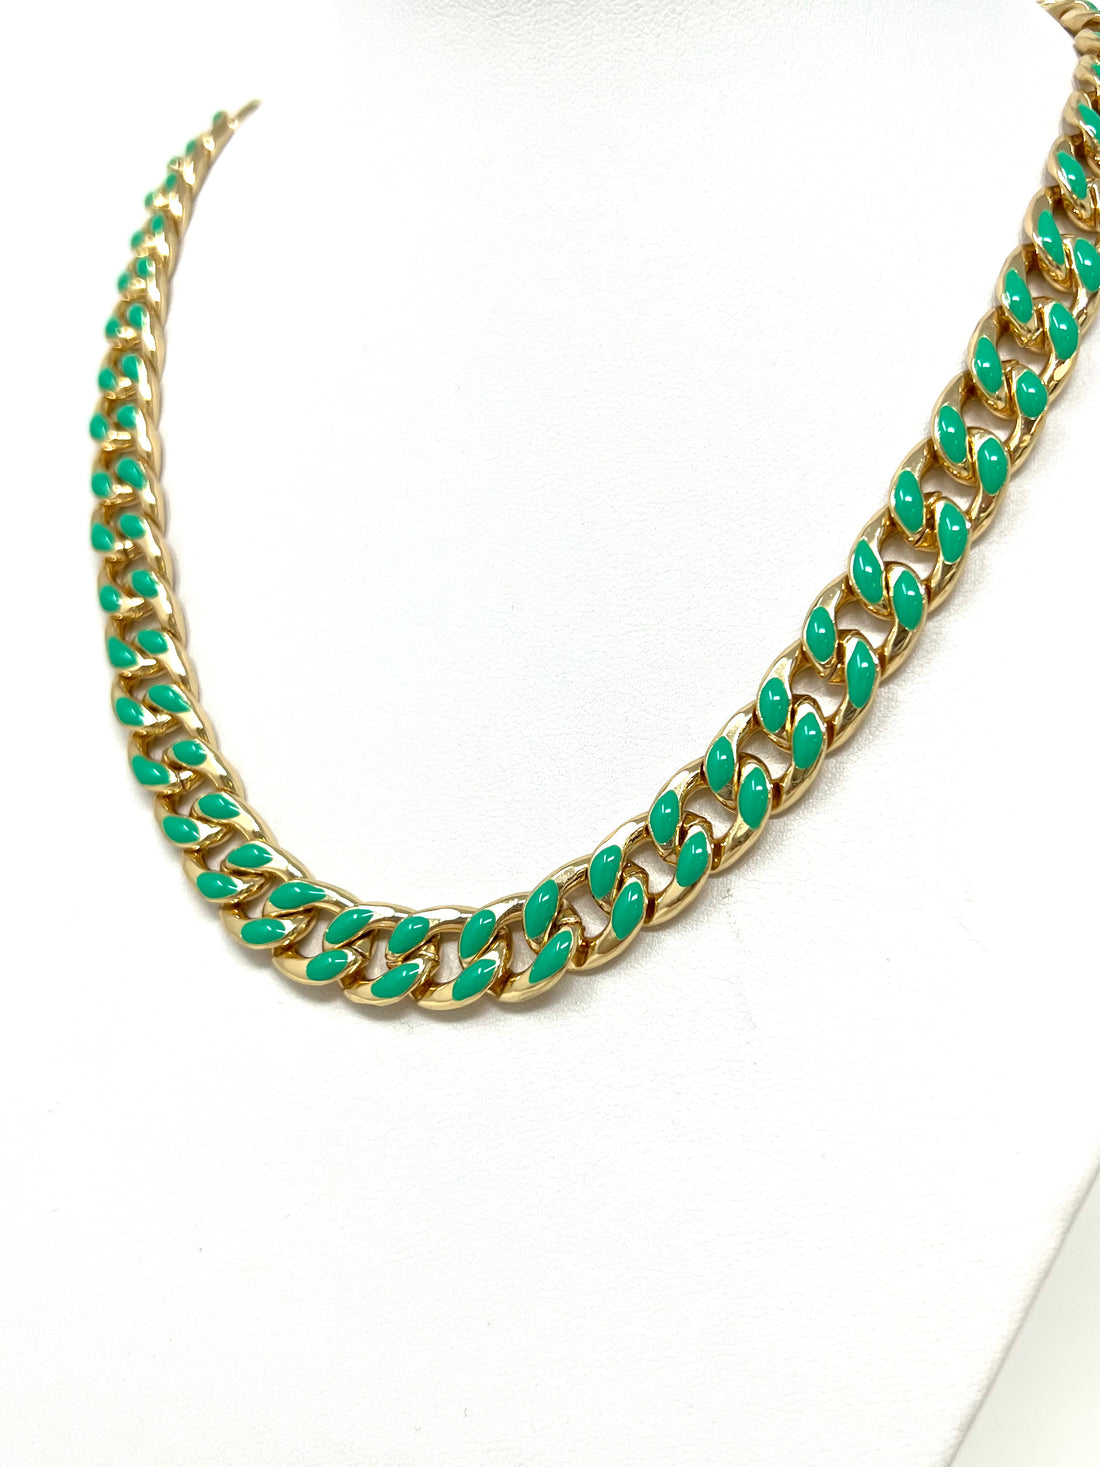 Enamel Curb Chain Necklace in Gold with Green